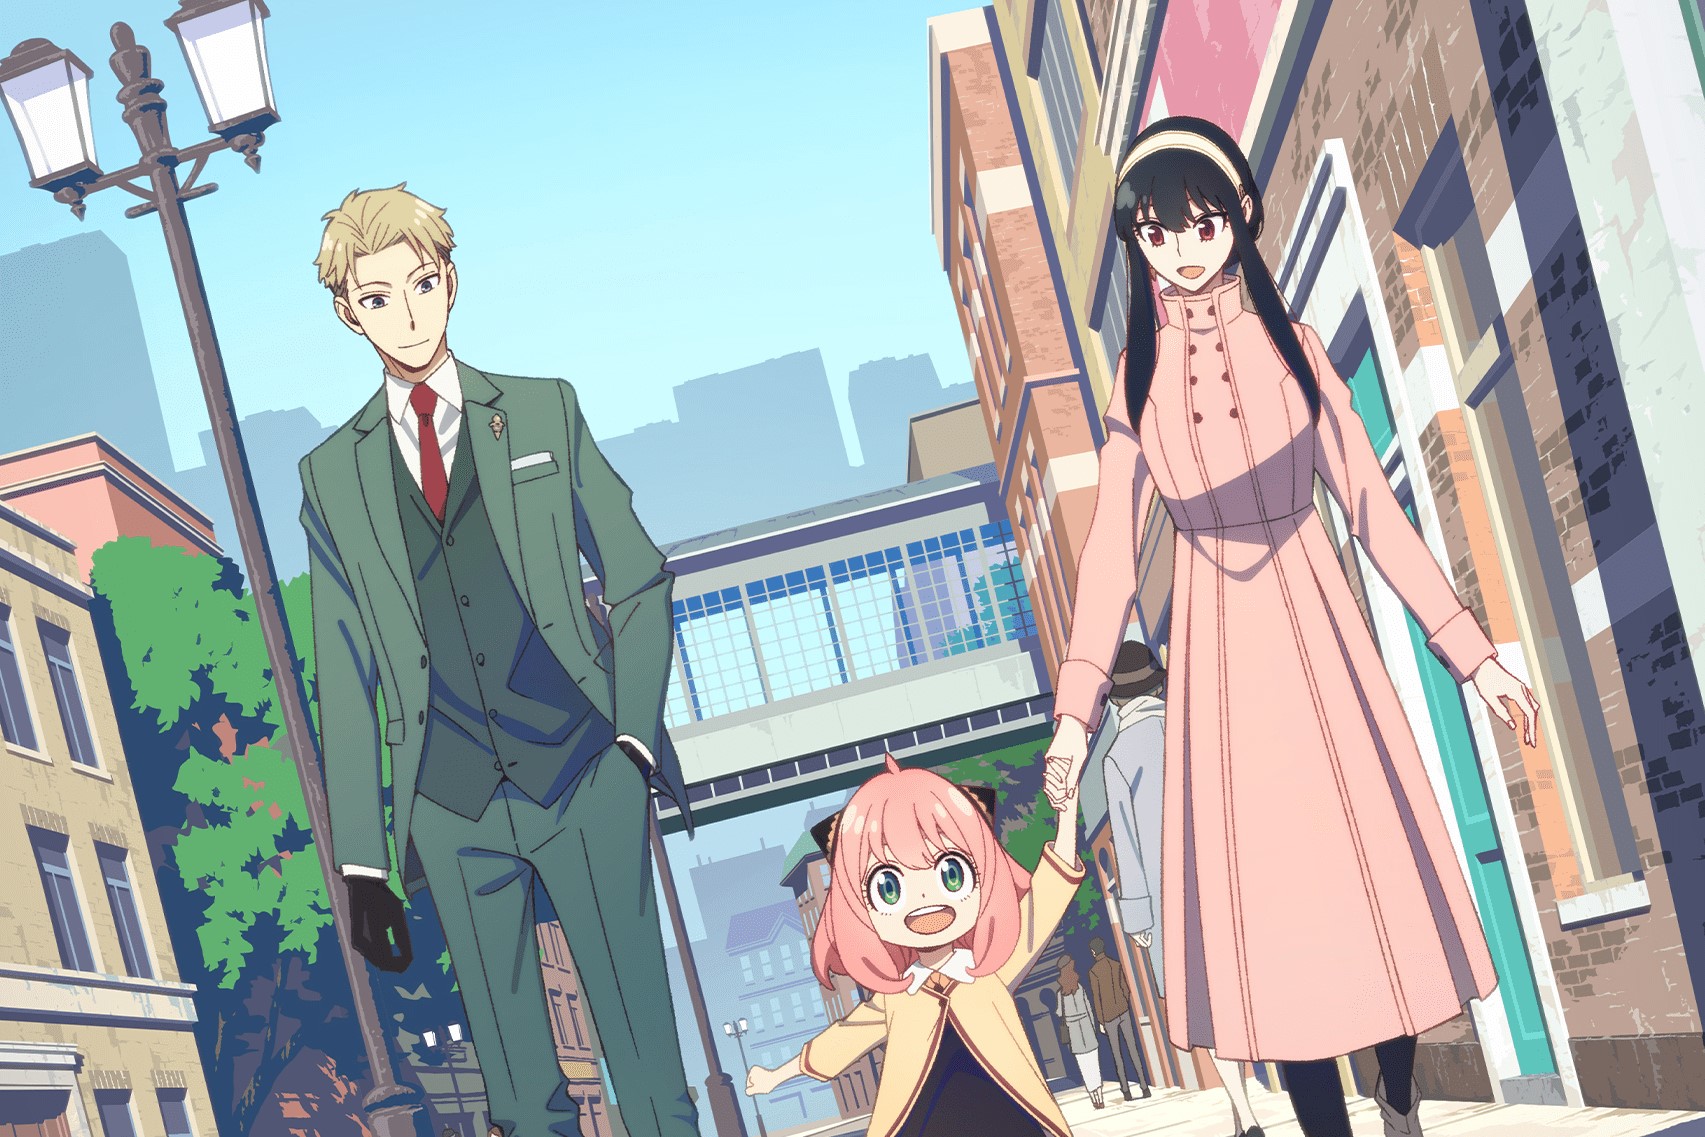 Spy X Family Anime Release Date Confirmed Scheduled For April 2022